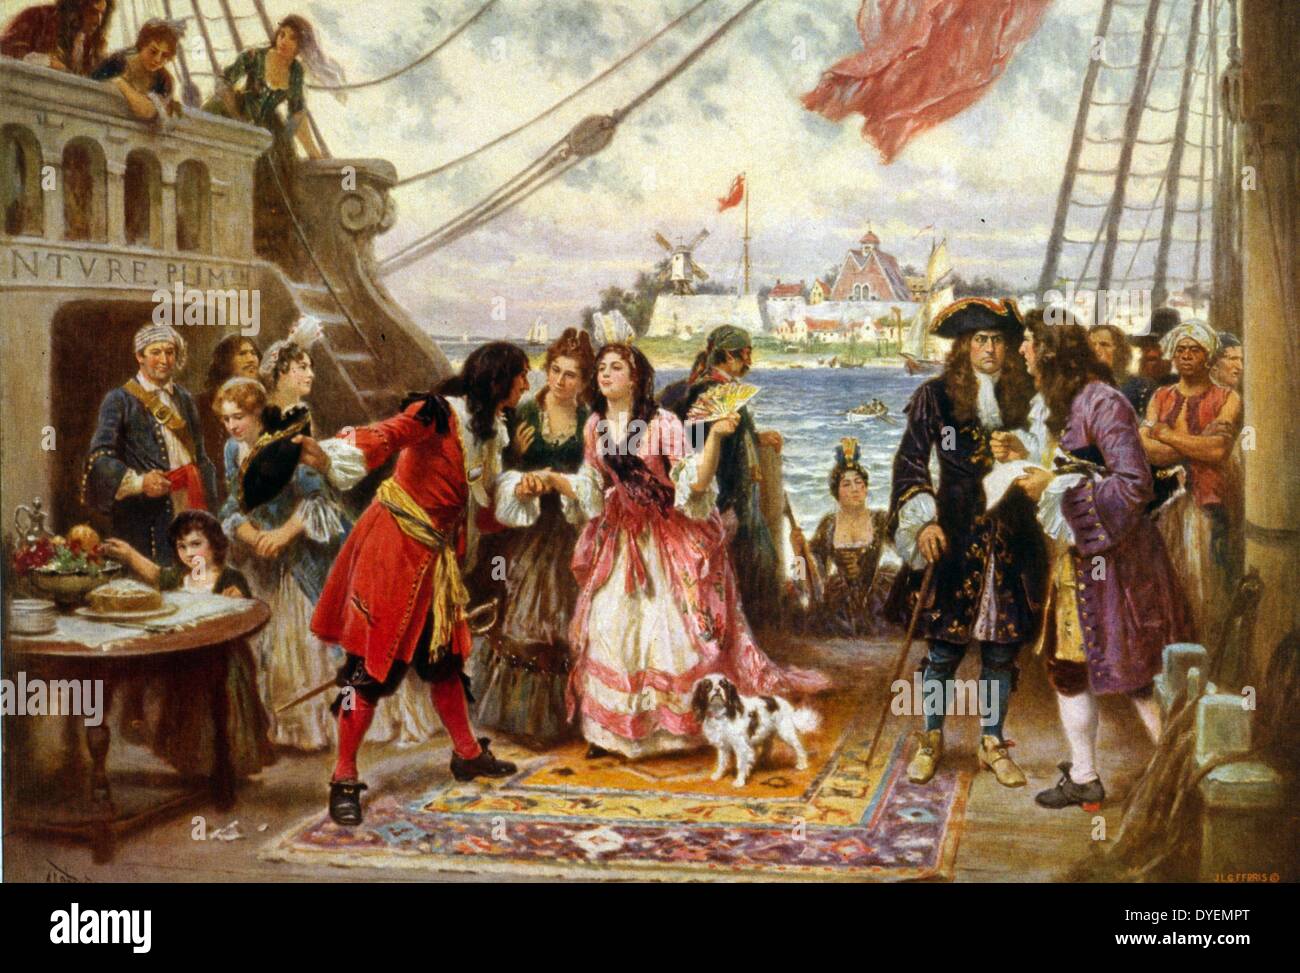 Captain Kidd in New York Harbour by Jean Leon Gerome Ferris 1863-1930, artist. Published: Cleveland, Ohio 1932. photomechanical print in halftone, colour showing Captain William Kidd welcoming a young woman on board his ship; other men and women crowd the deck as another woman steps aboard. Stock Photo